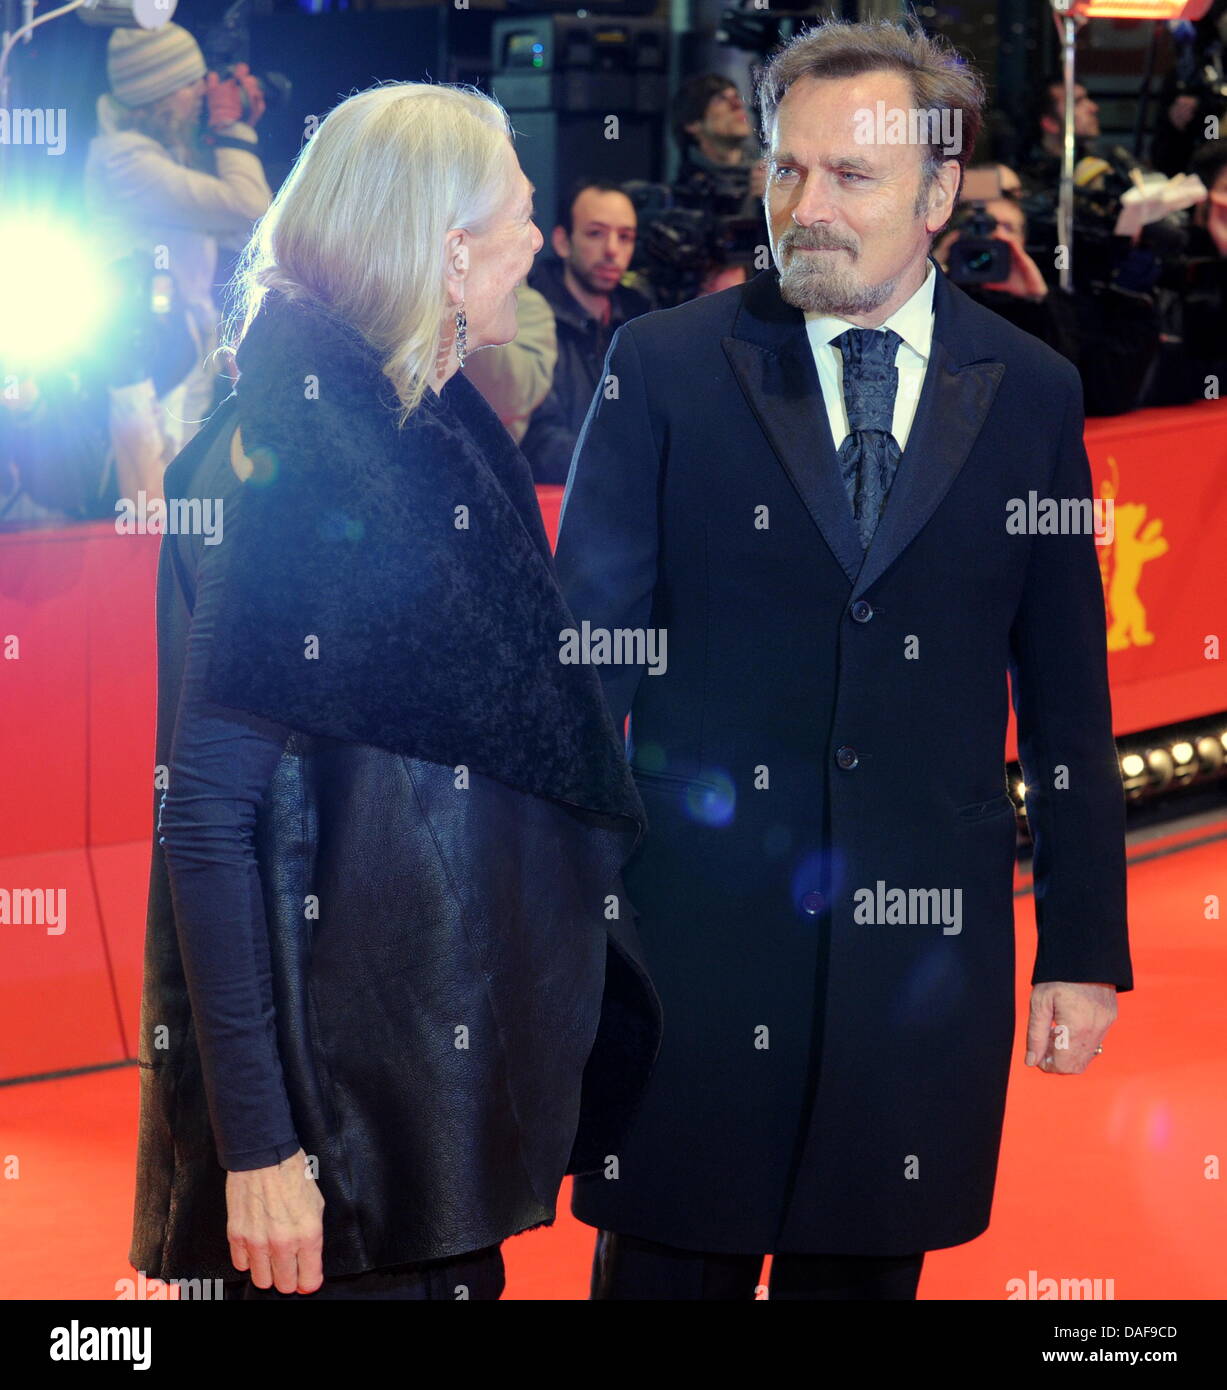 British actress Vanessa Redgrave (l) and her husband, Italian actor Franco Nero arrive for the premiere of movie 'Coriolanus' during the 61st Berlin International Film Festival in Berlin, Germany, 14 February 2011. The film runs in competition of the International Film Festival. The 61st Berlinale takes place from 10 to 20 February 2011. Photo: Tim Brakemeier Stock Photo